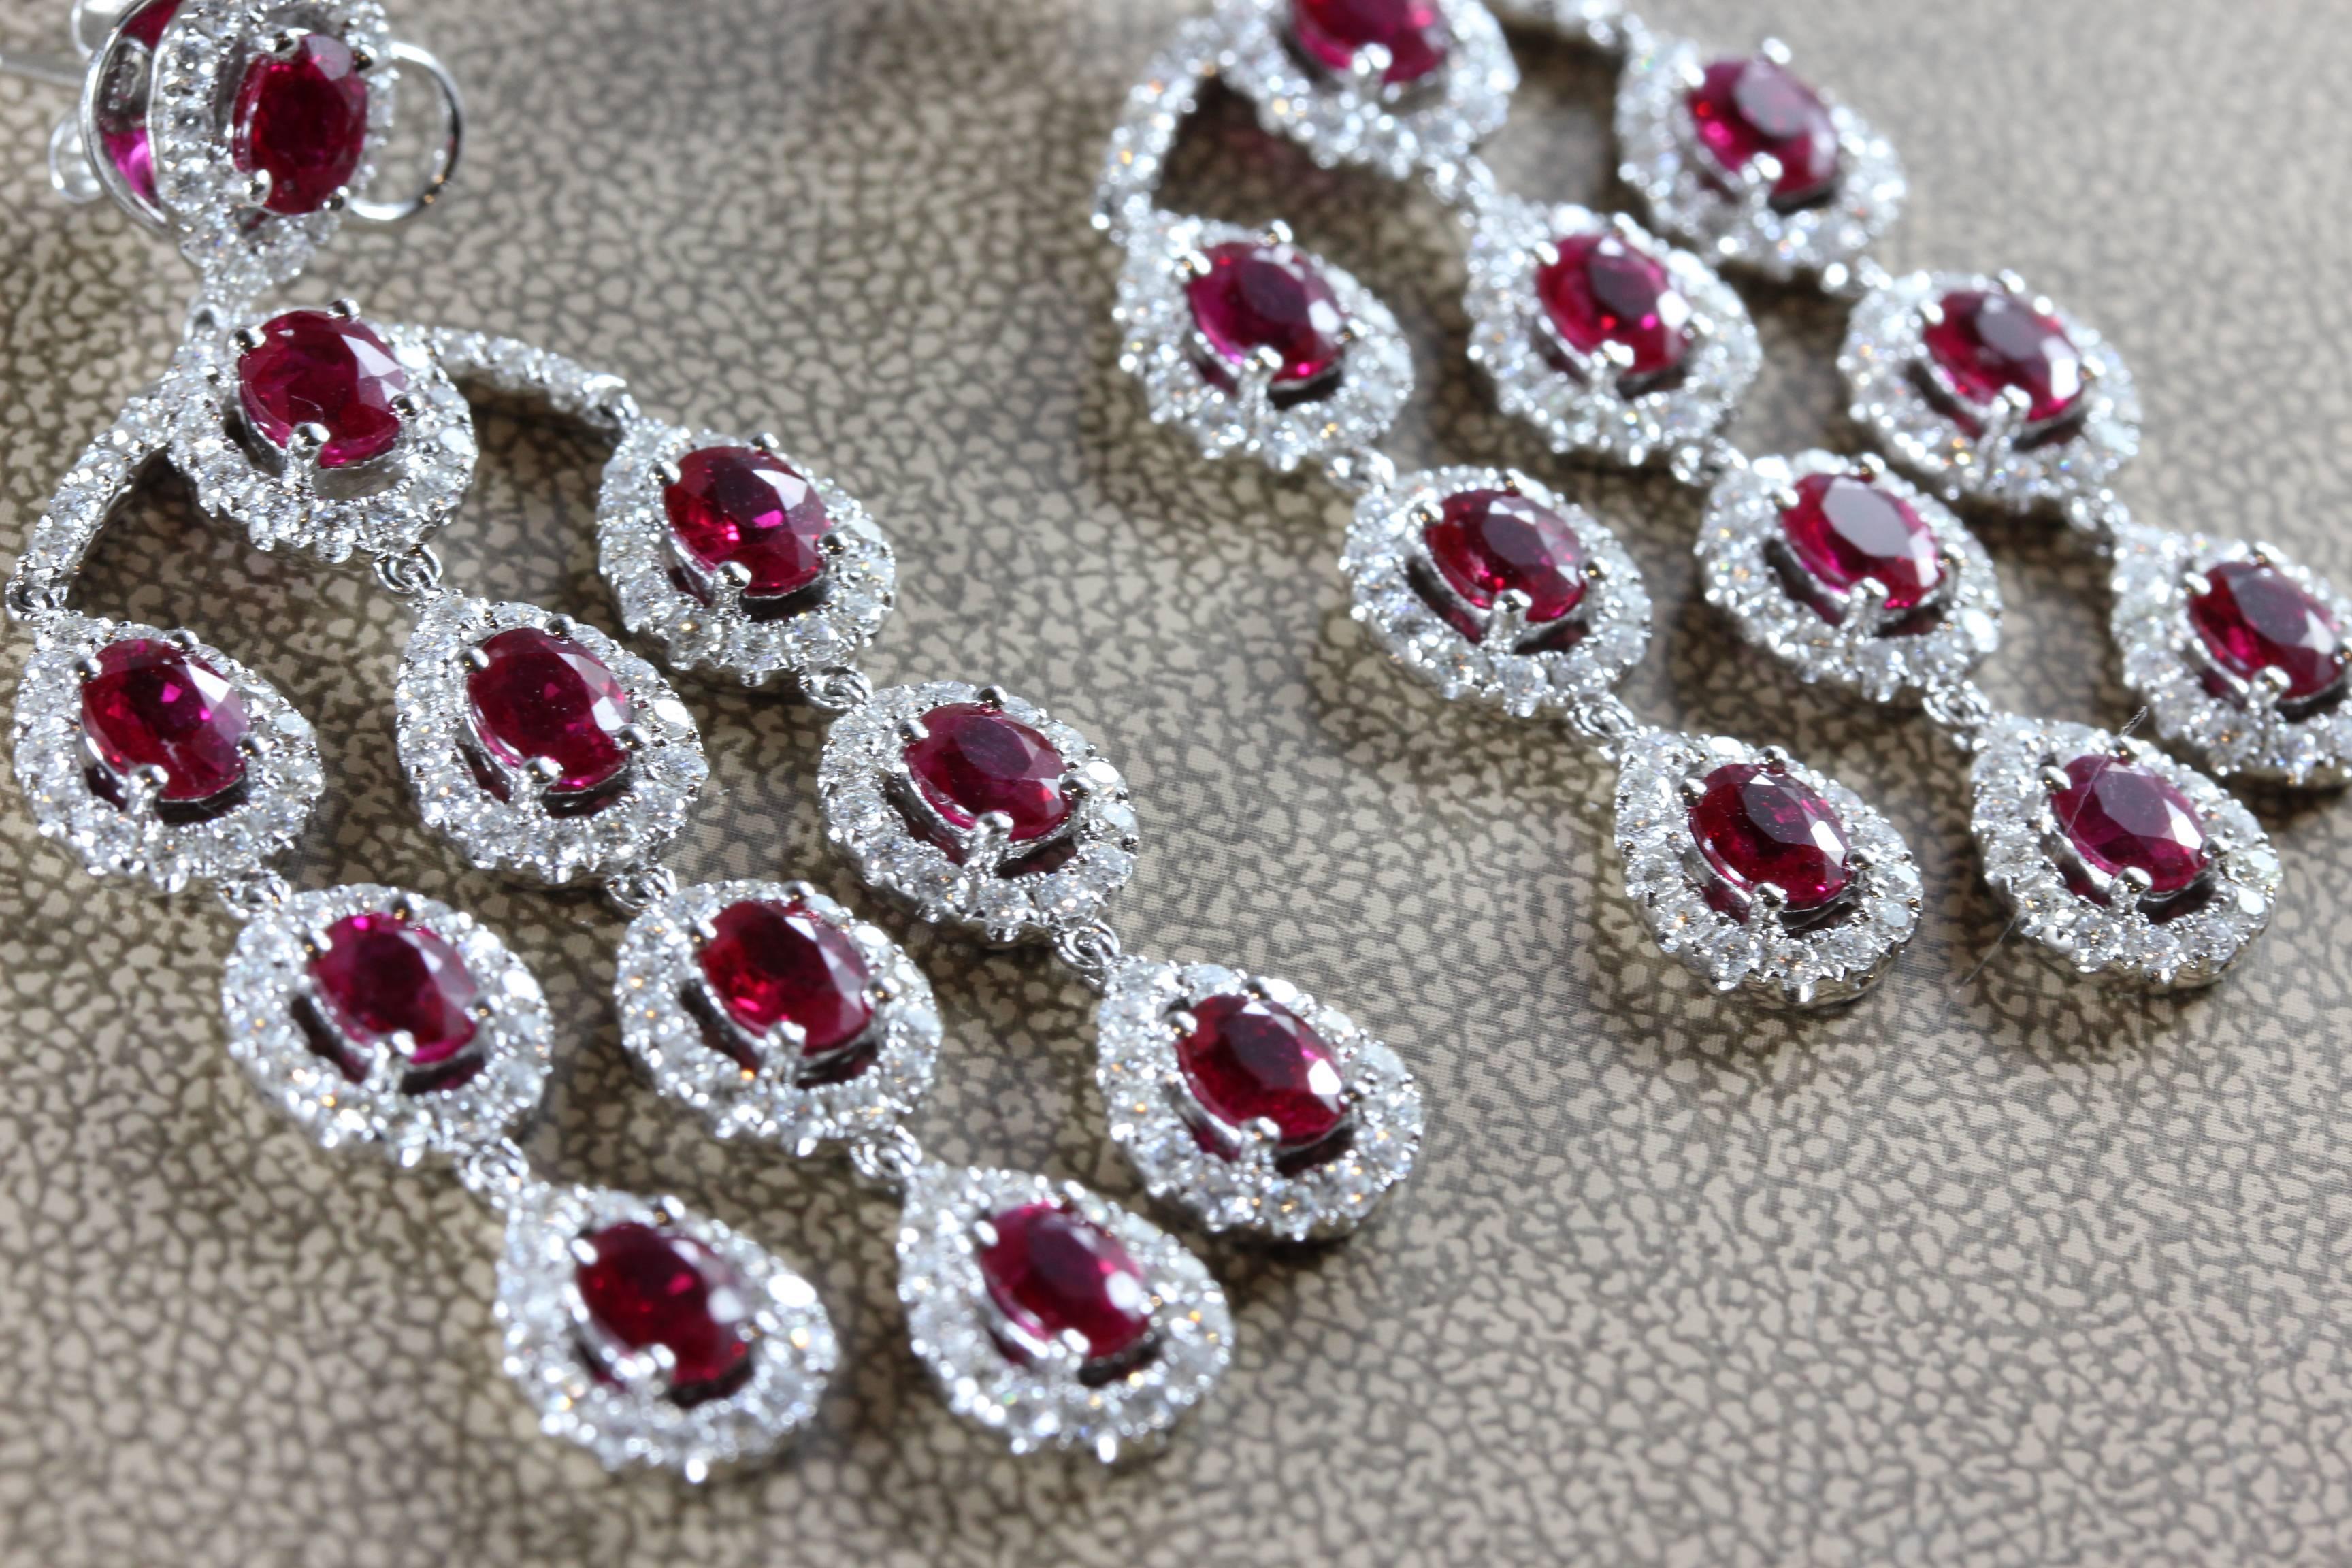 This spectacular pair of earrings feature 10.72 carats of fine vivid red pigeon's blood rubies in oval shape, which we believe to have Burmese origin due to their intense color. The rest of the earrings are studded with 3.87 carats of round cut